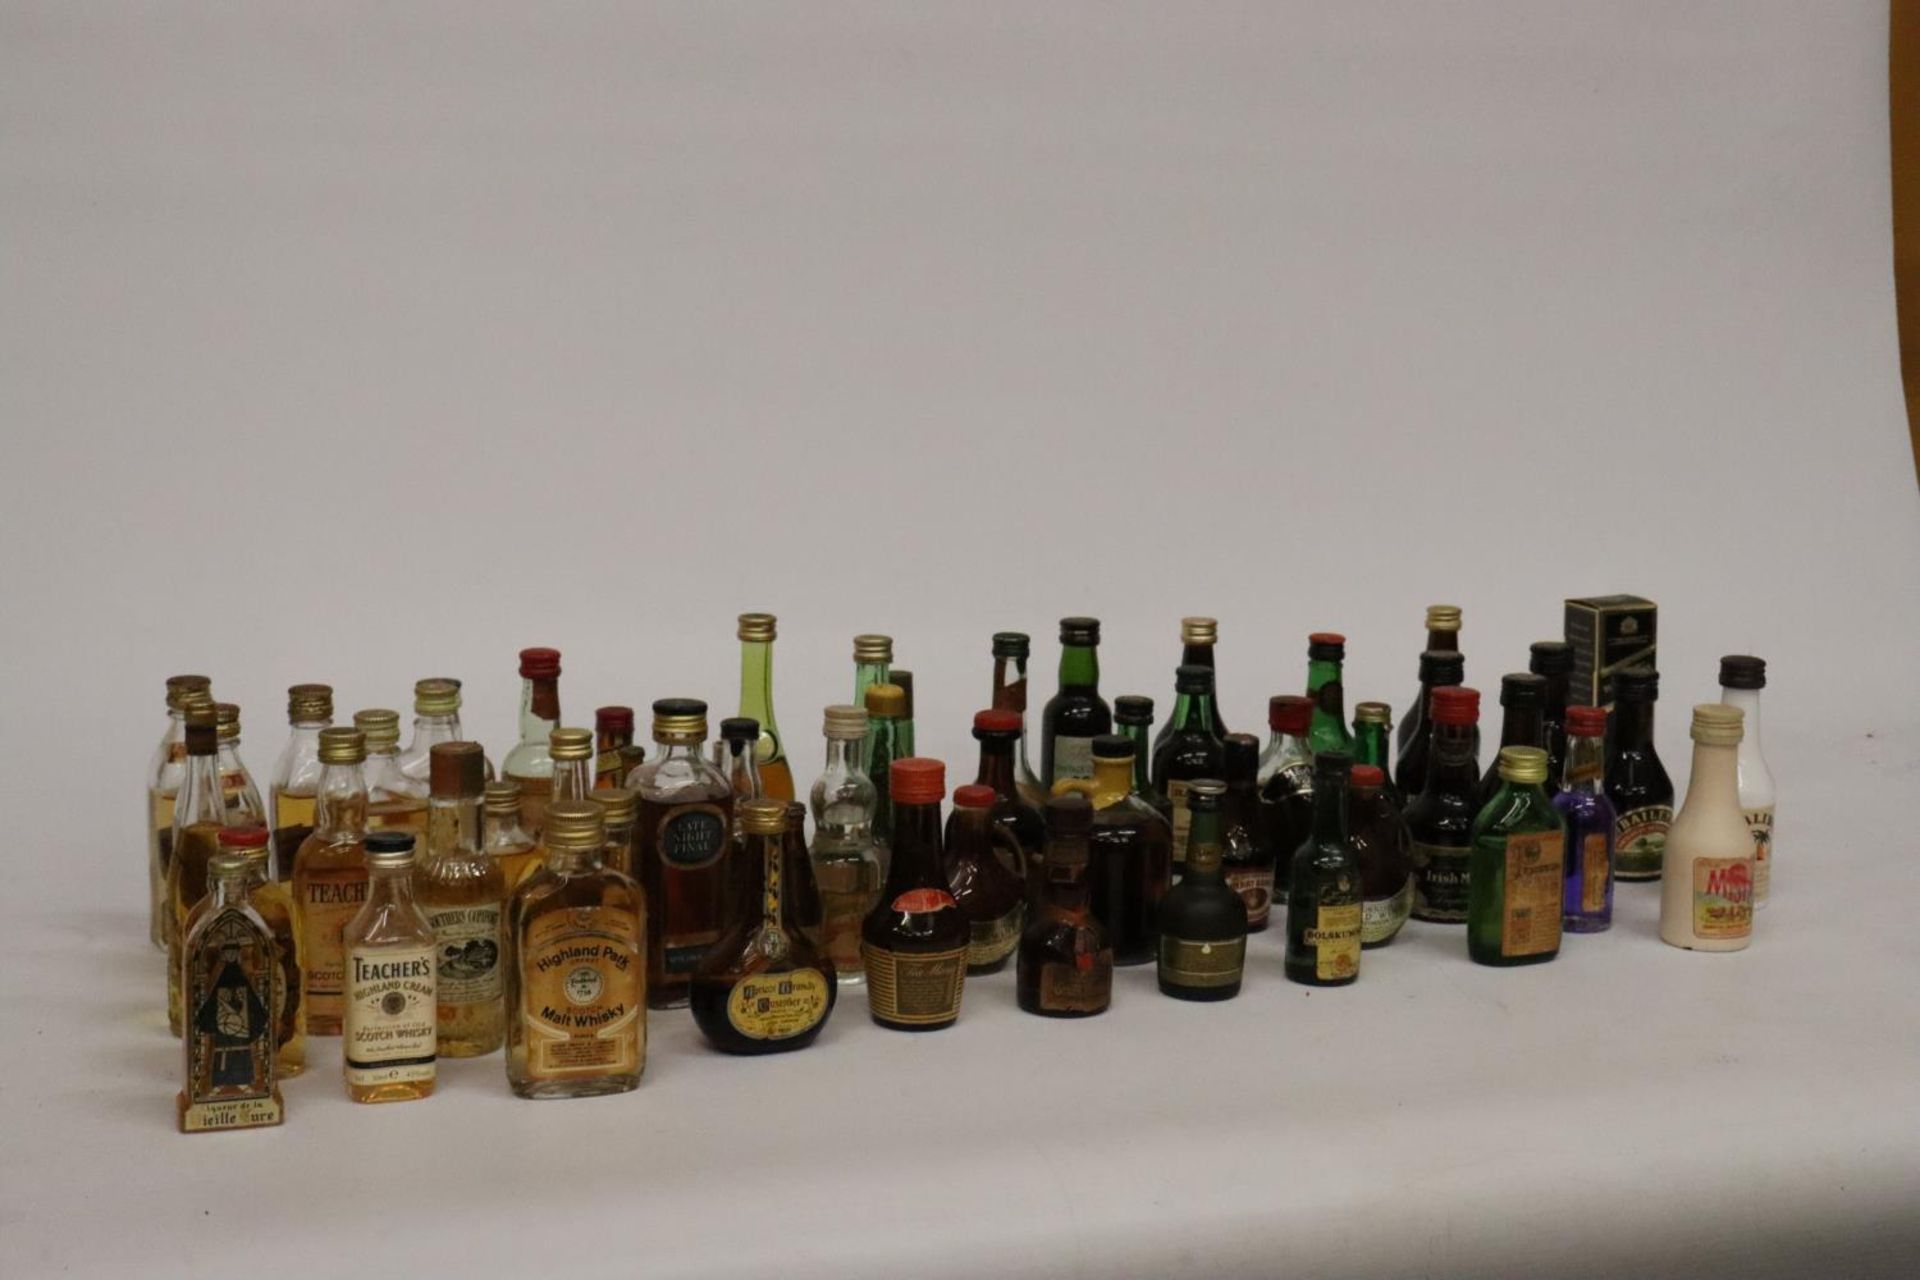 A LARGE QUANTITY OF MINIATURE BOTTLES OF ALCOHOL - Image 10 of 10